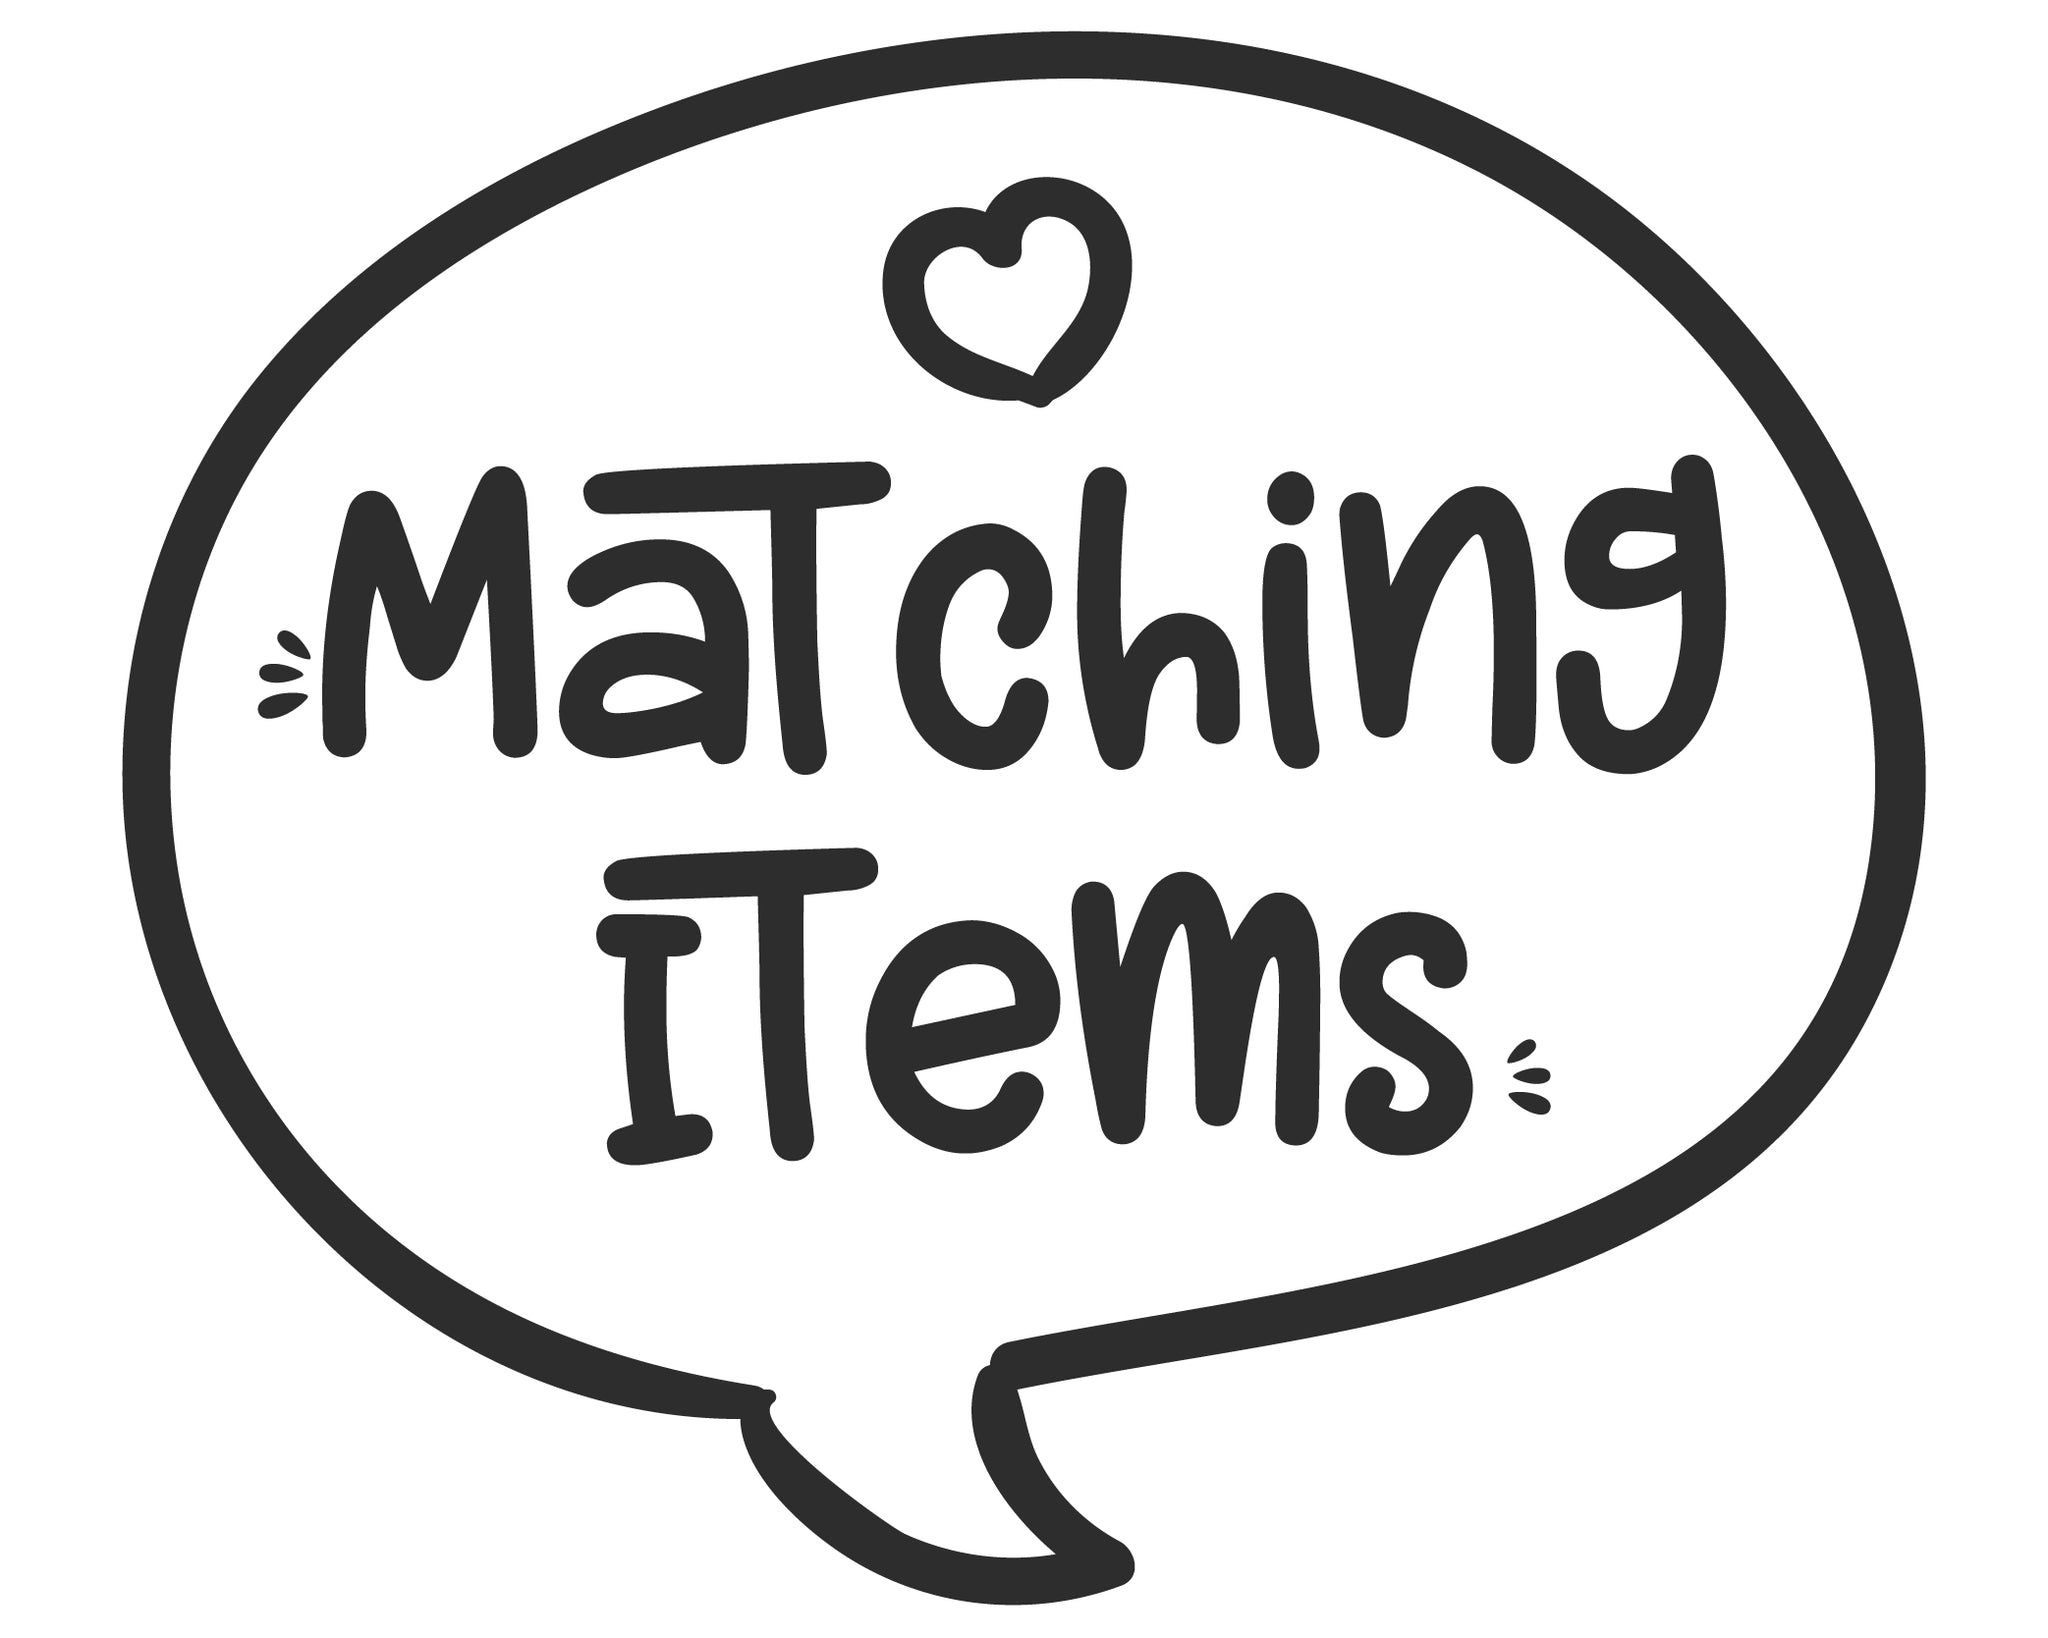 Made to Match Party Decor Items, Printable Custom Matching Items